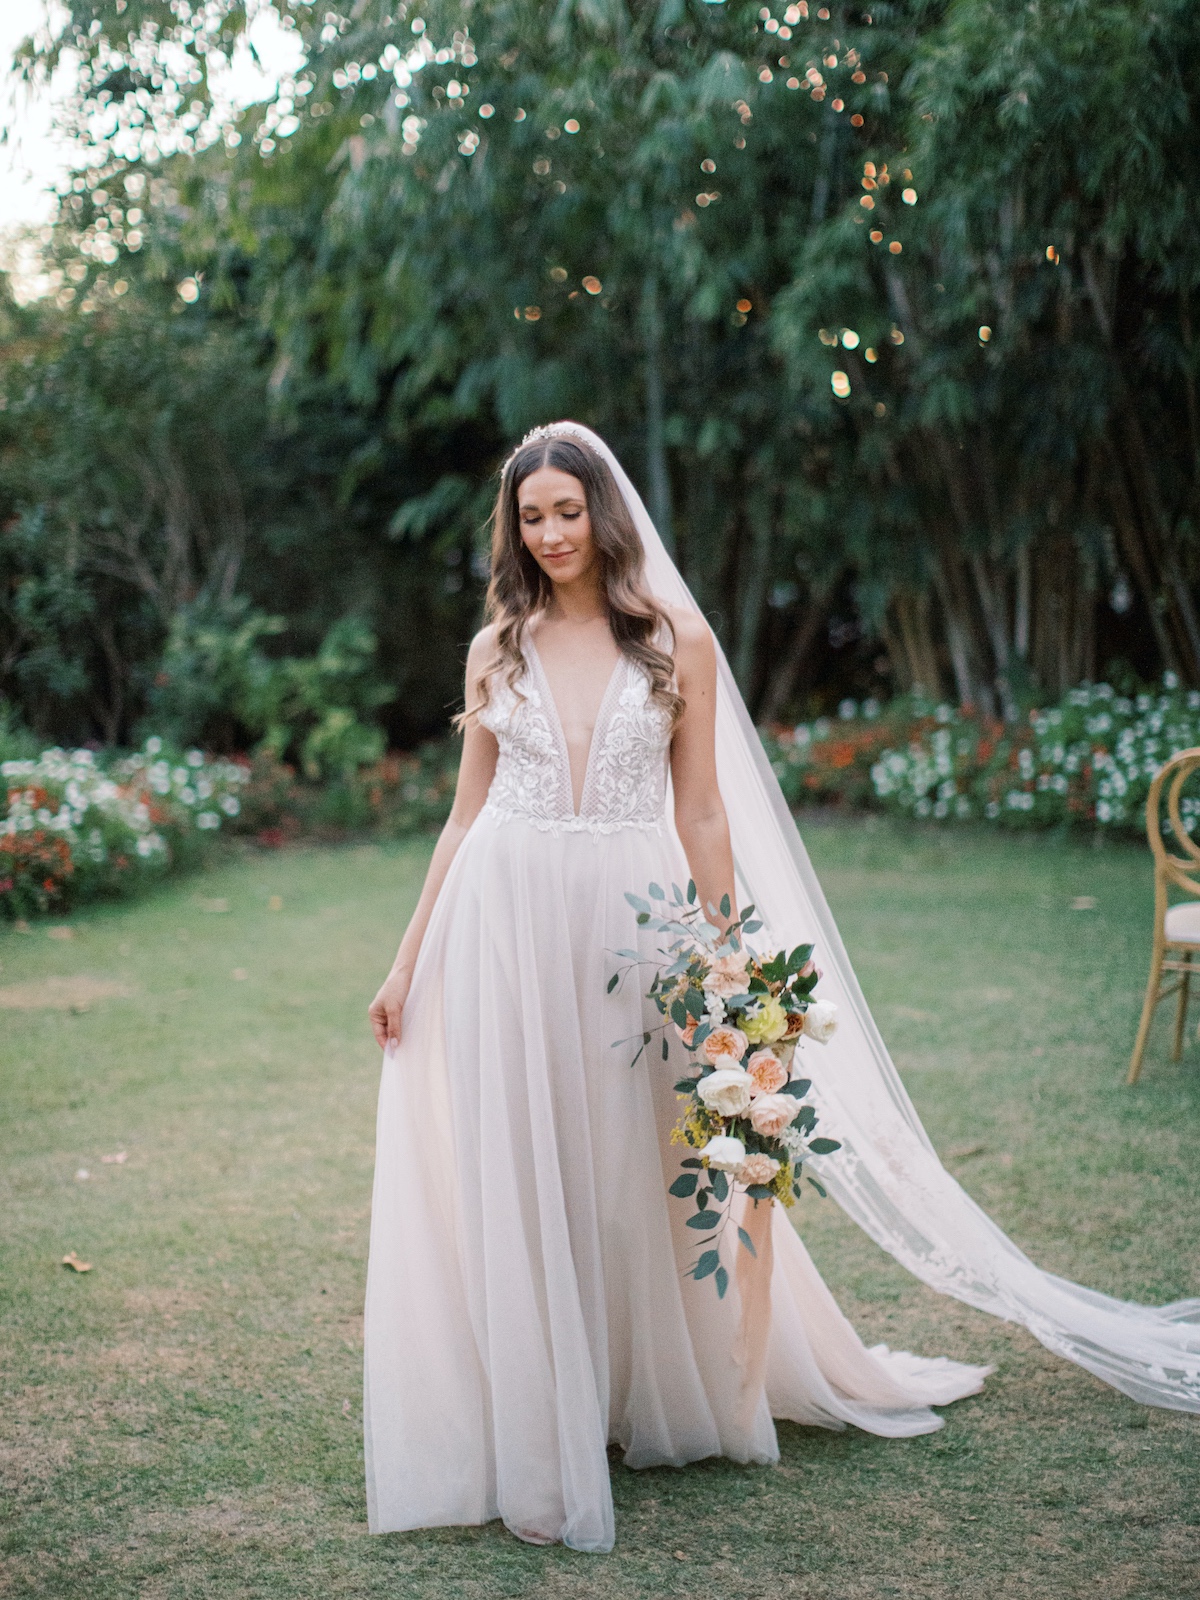 low front wedding gown with cathedral wedding veil